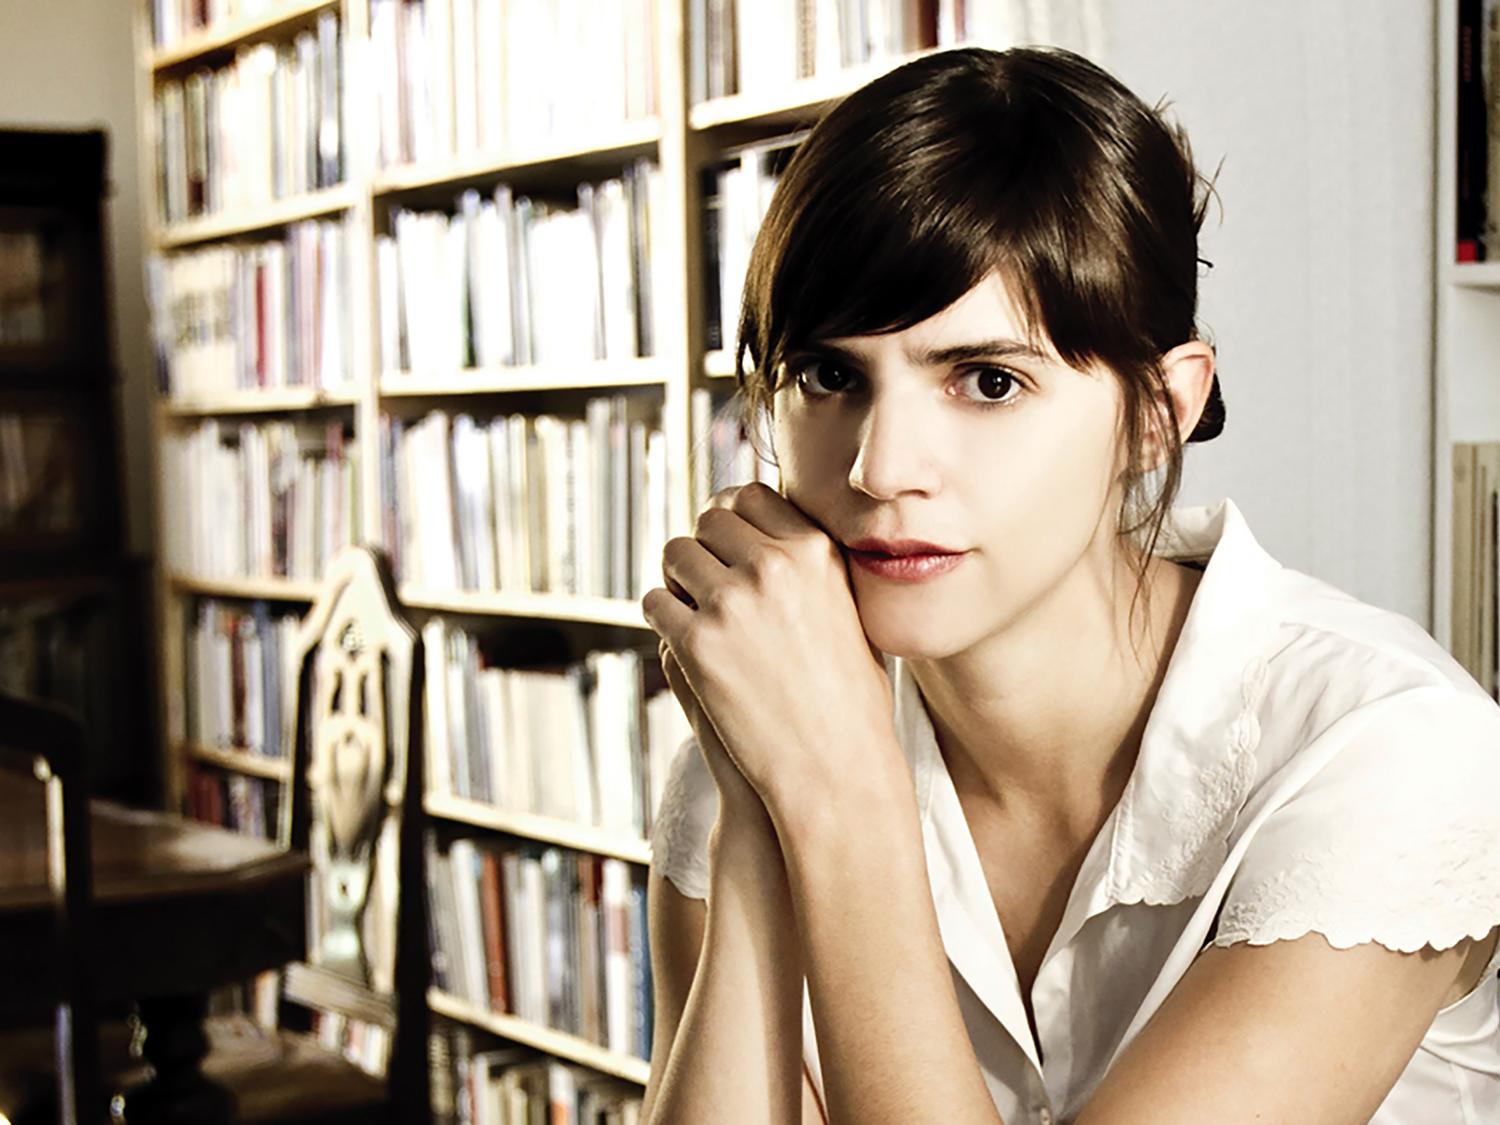 American Book Award&ndash;Winning Author Valeria Luiselli to Read at Bard College, Tuesday, April 23